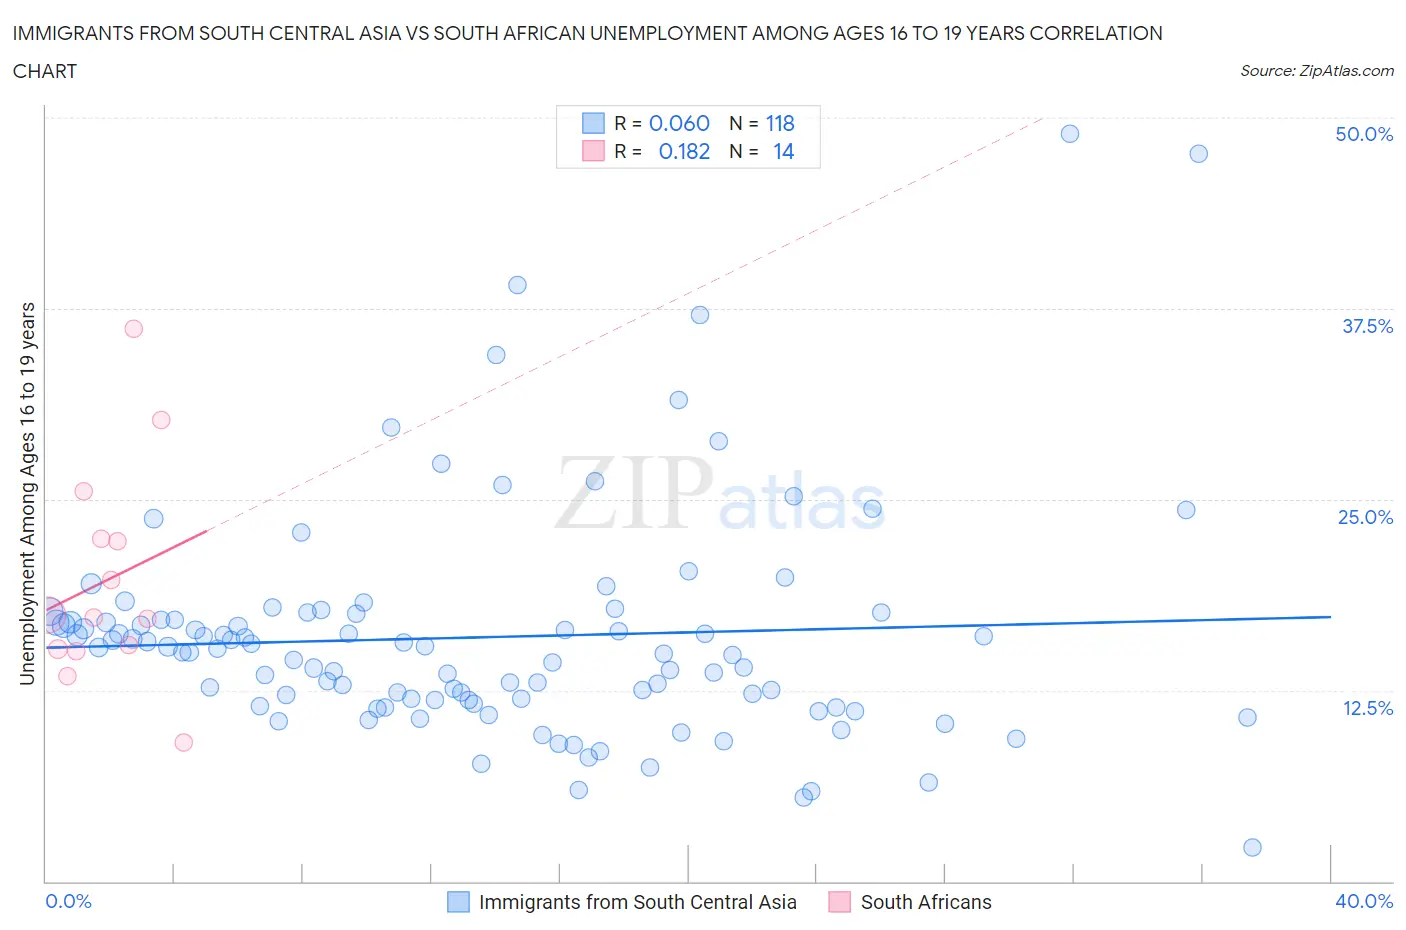 Immigrants from South Central Asia vs South African Unemployment Among Ages 16 to 19 years